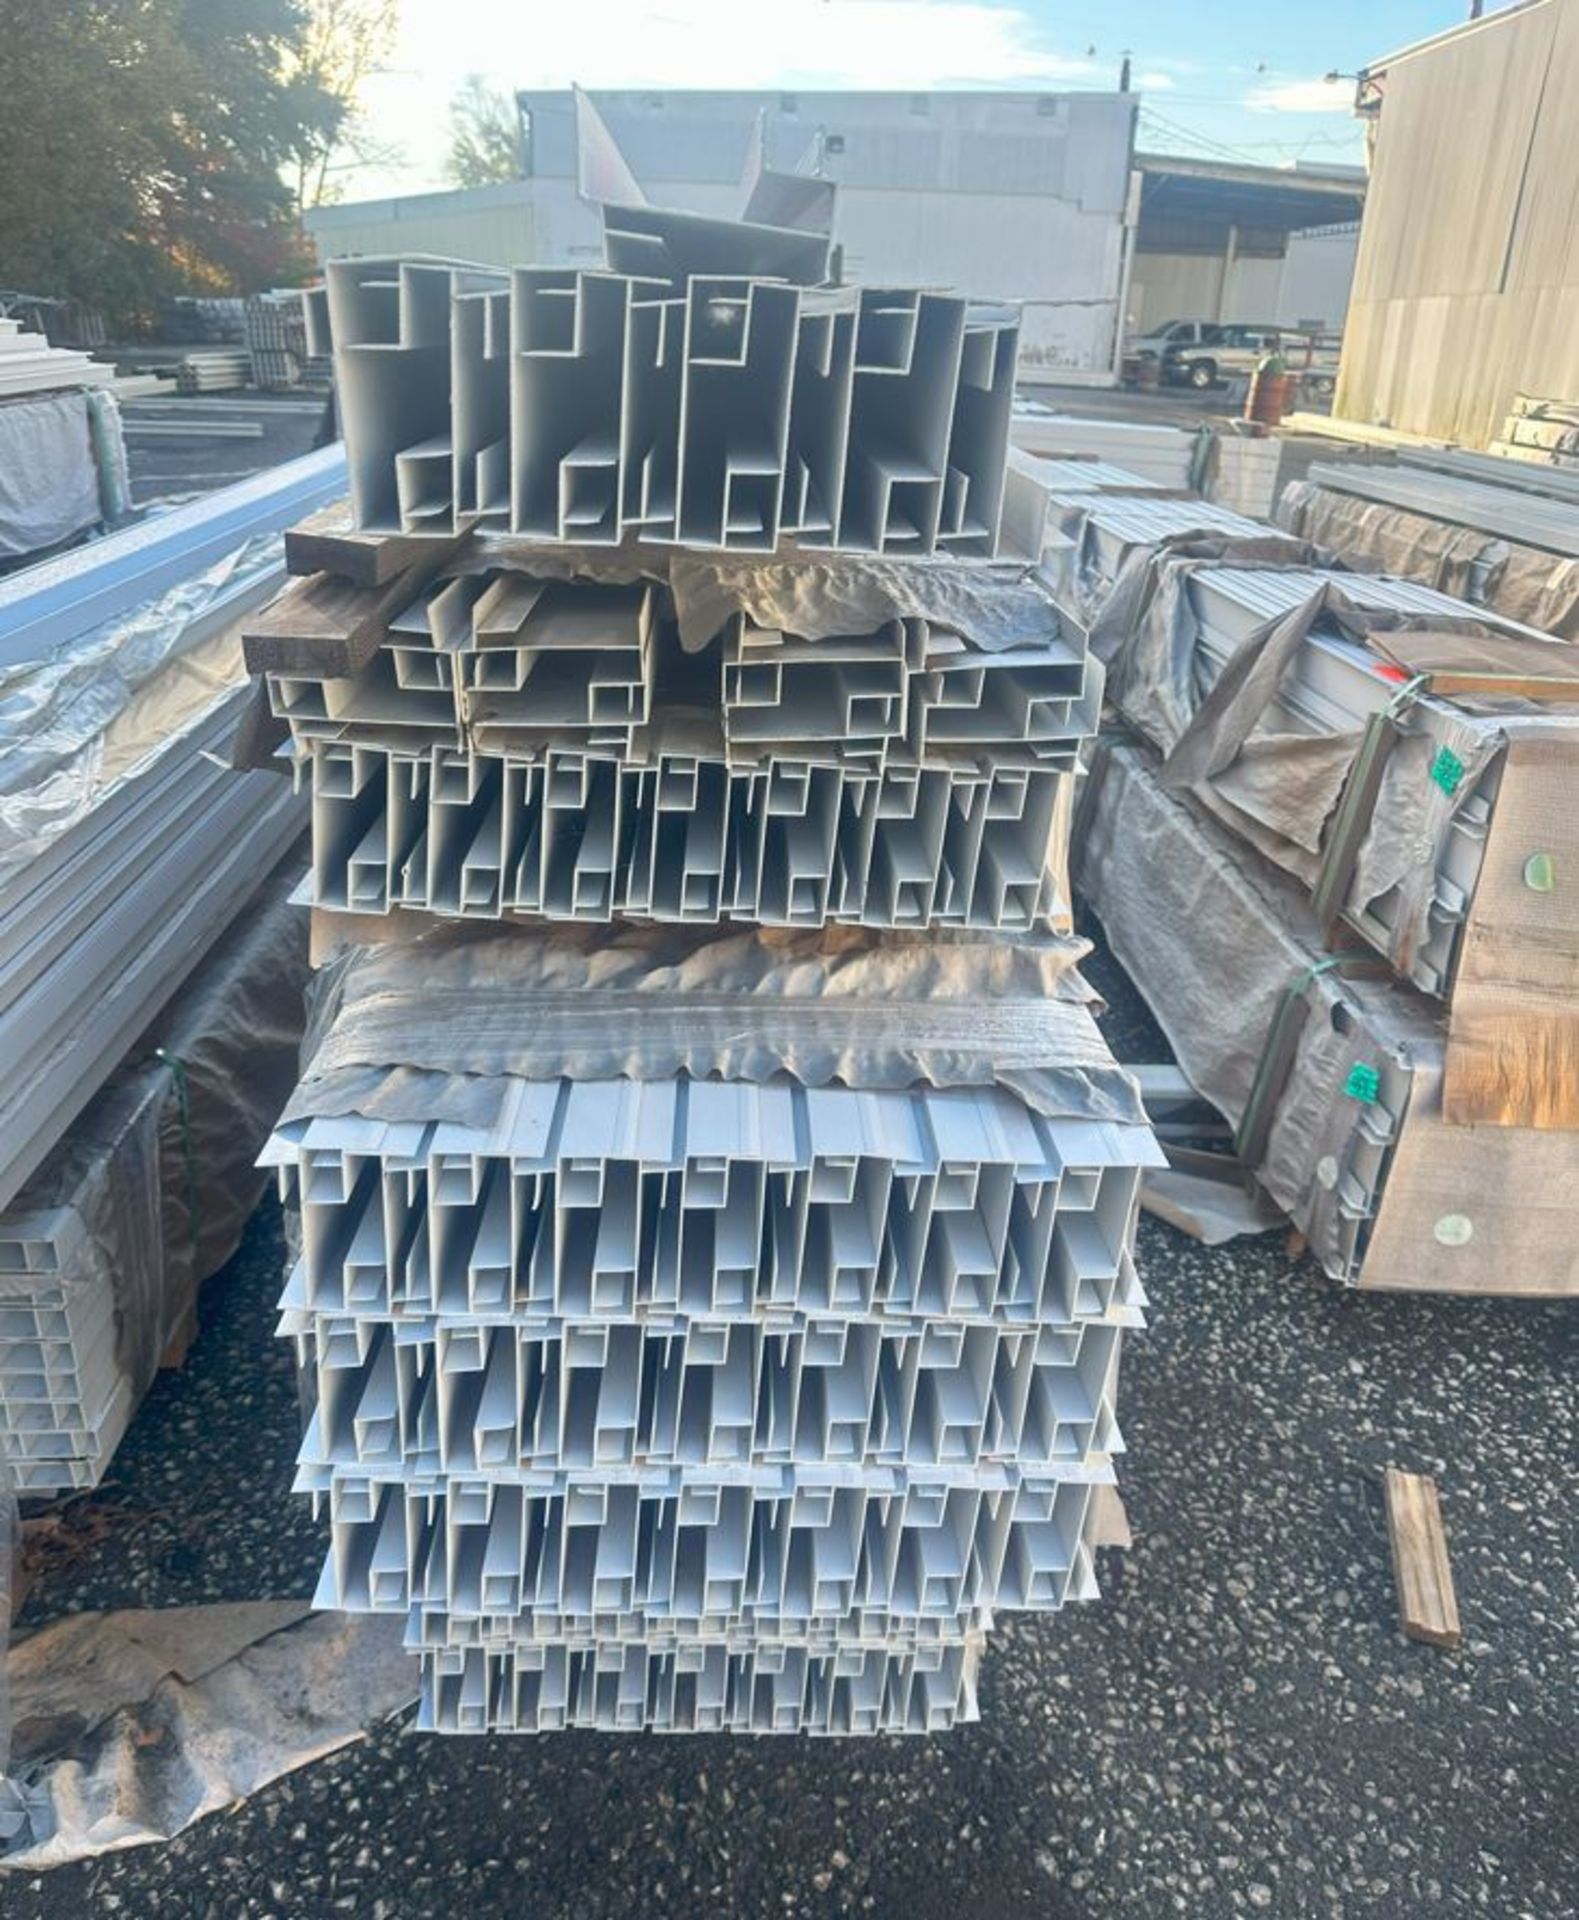 3 Complete & 2 Incomplete Bundles of Extruded Aluminum Stock @ 950 lbs +/- per bundle & 2 - Image 2 of 5